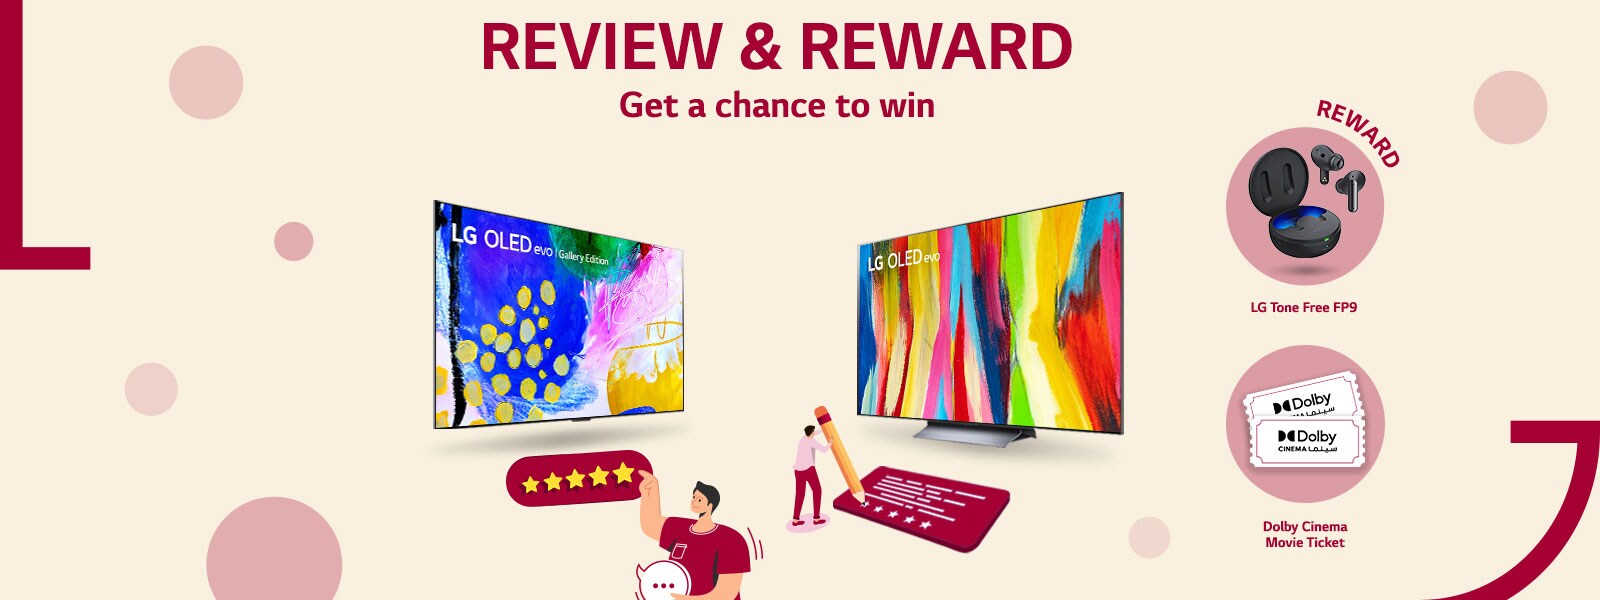 OLED Review & Reward campaign